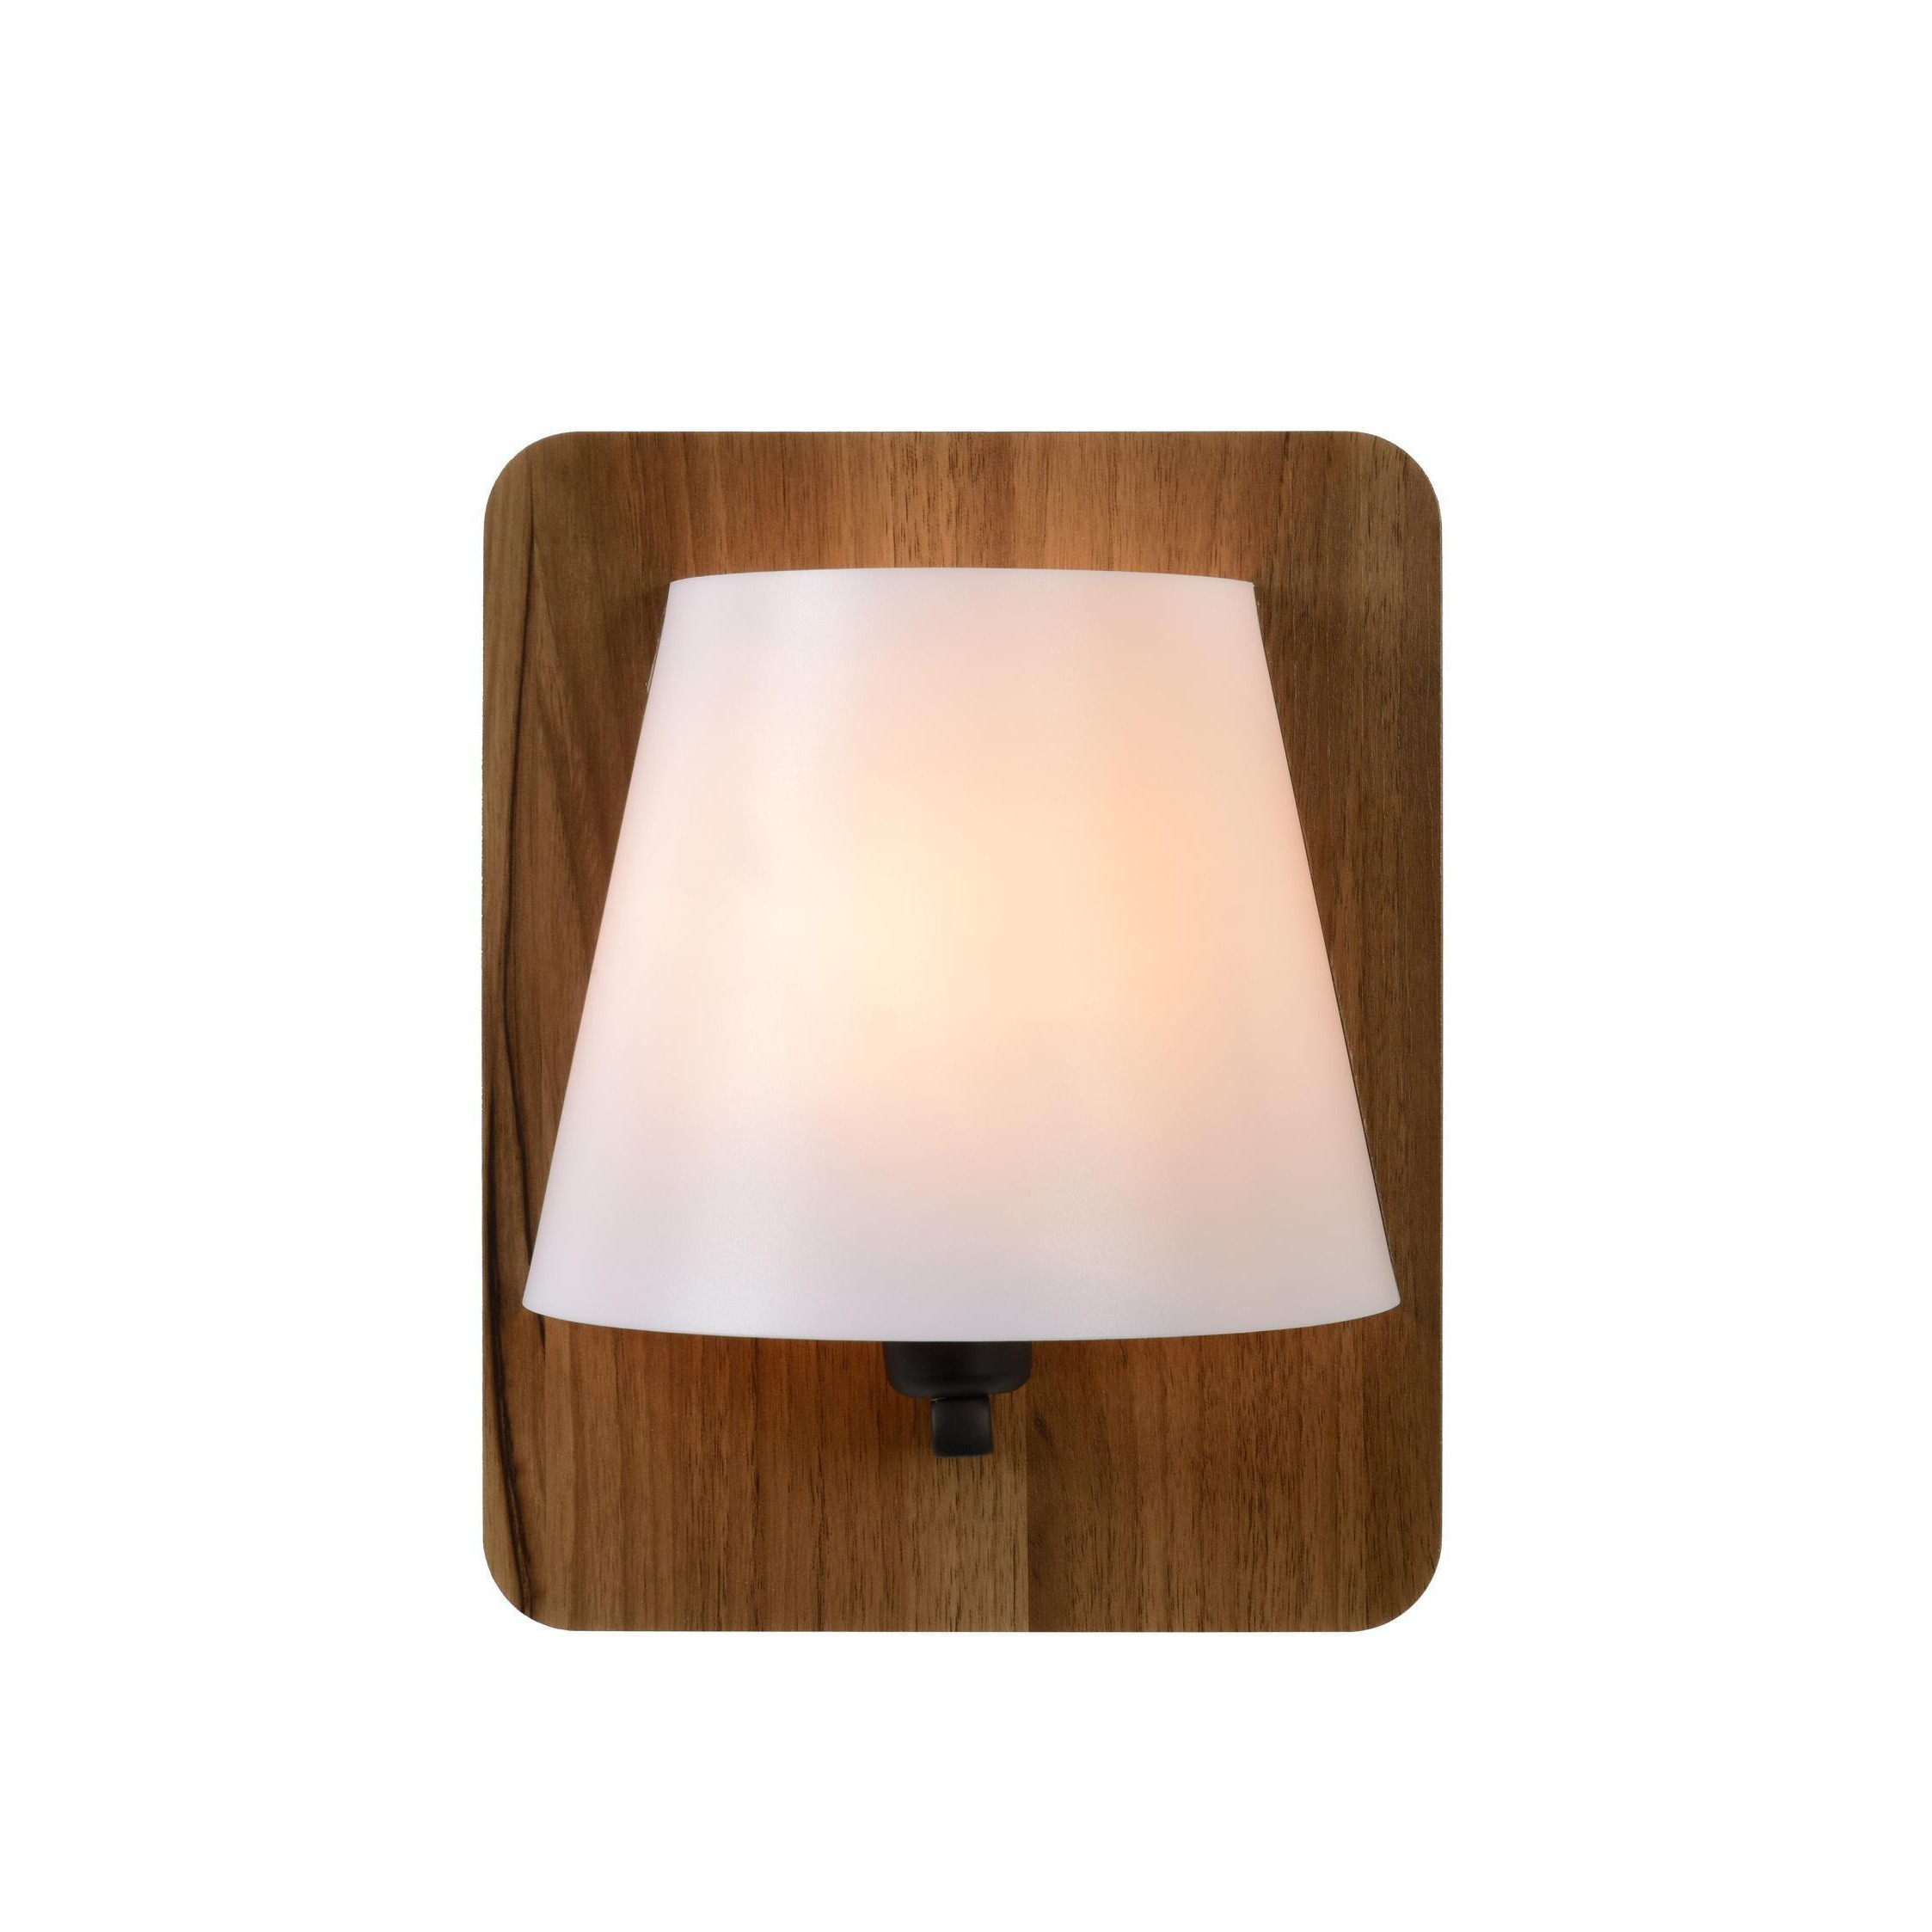 'IDAHO' Non Dimmable Stylish Modern Indoor Decorative Wall Light 1xE14 - image 1